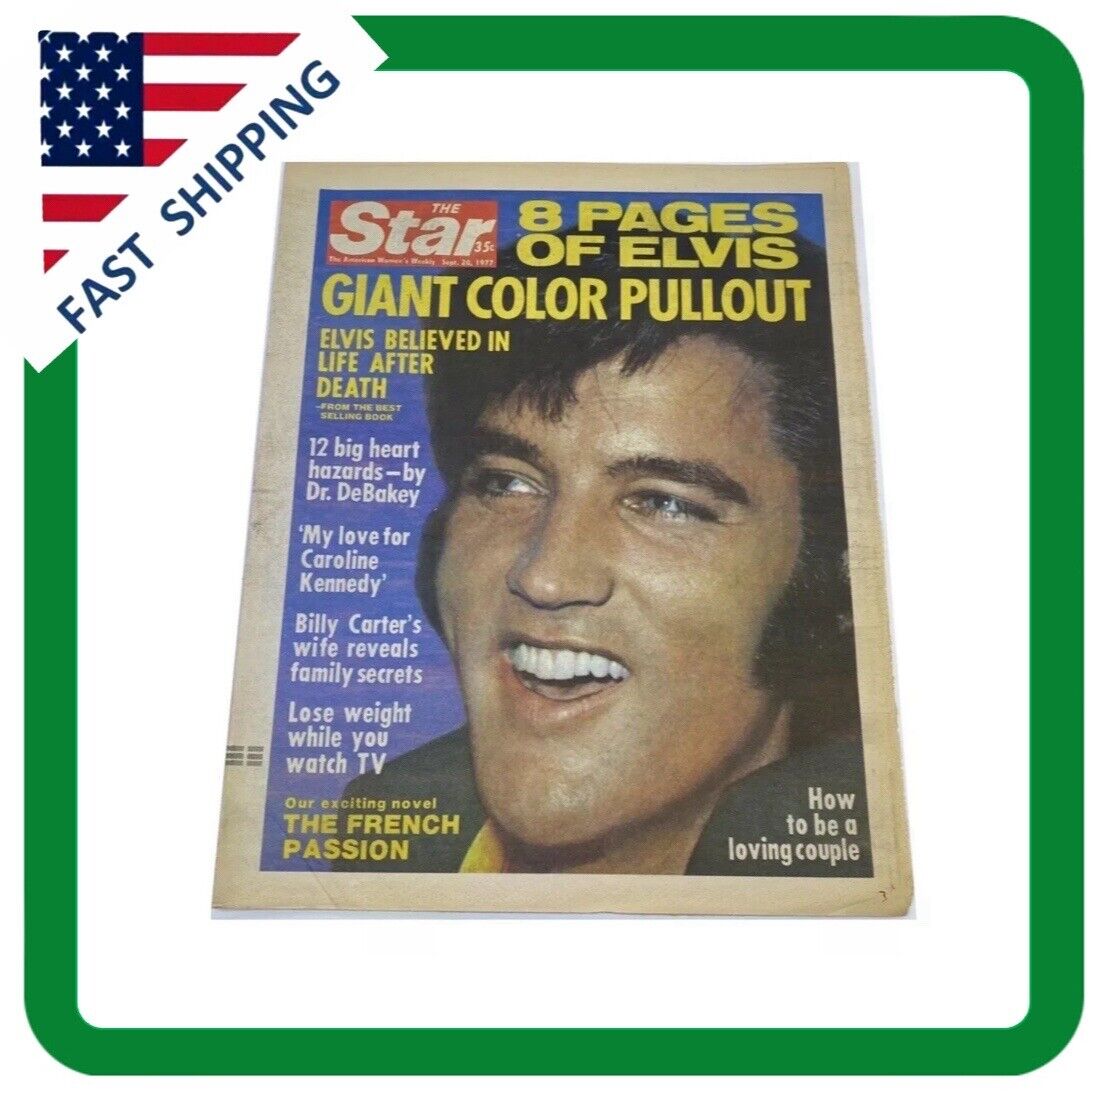 The Star Newspaper September 20 1977 Elvis Presley Cover with Color Pullout